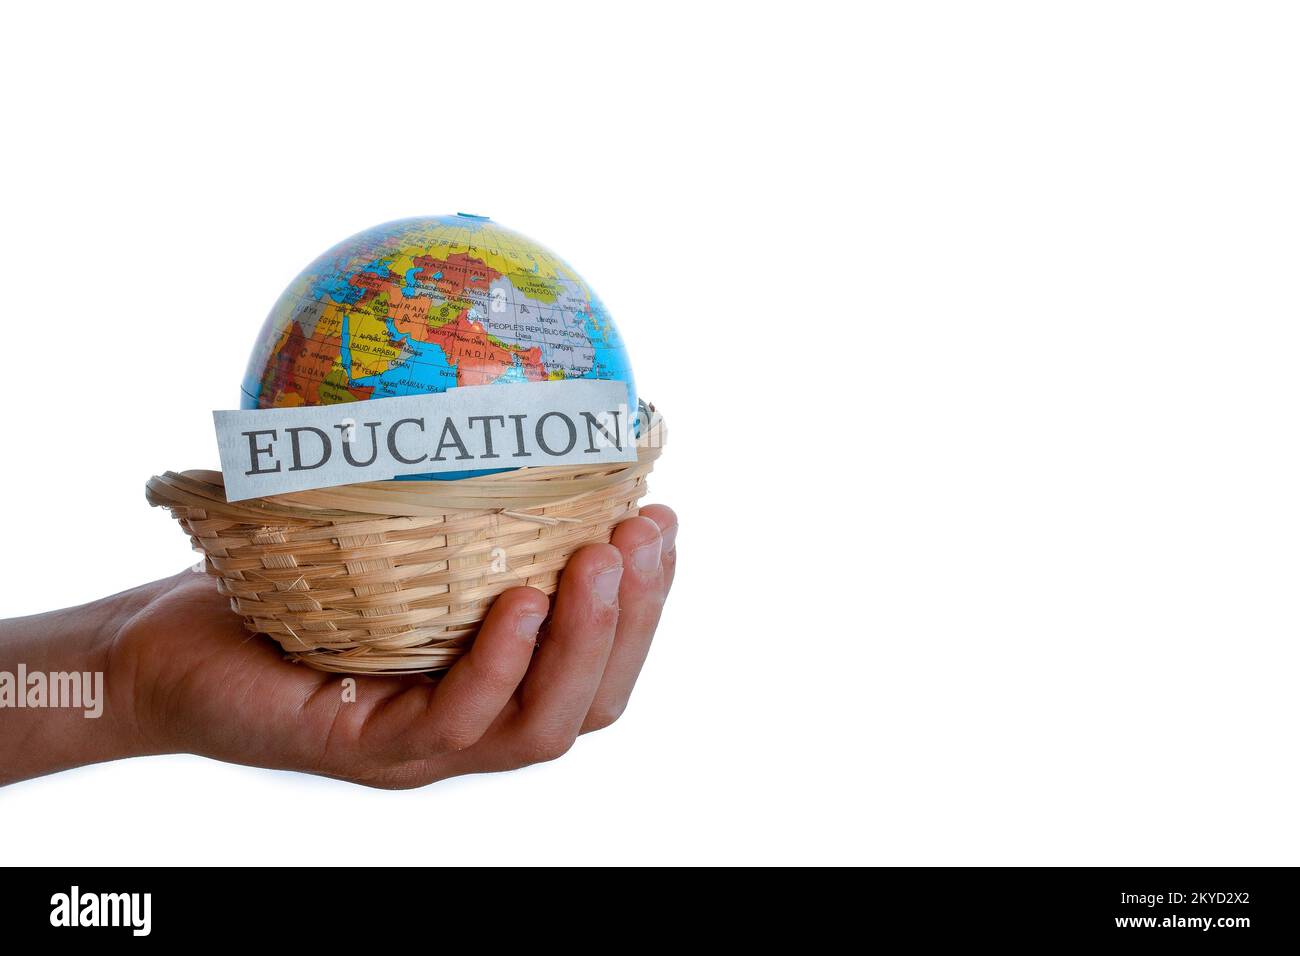 Education in one hand and globe in one hand in a basket Stock Photo